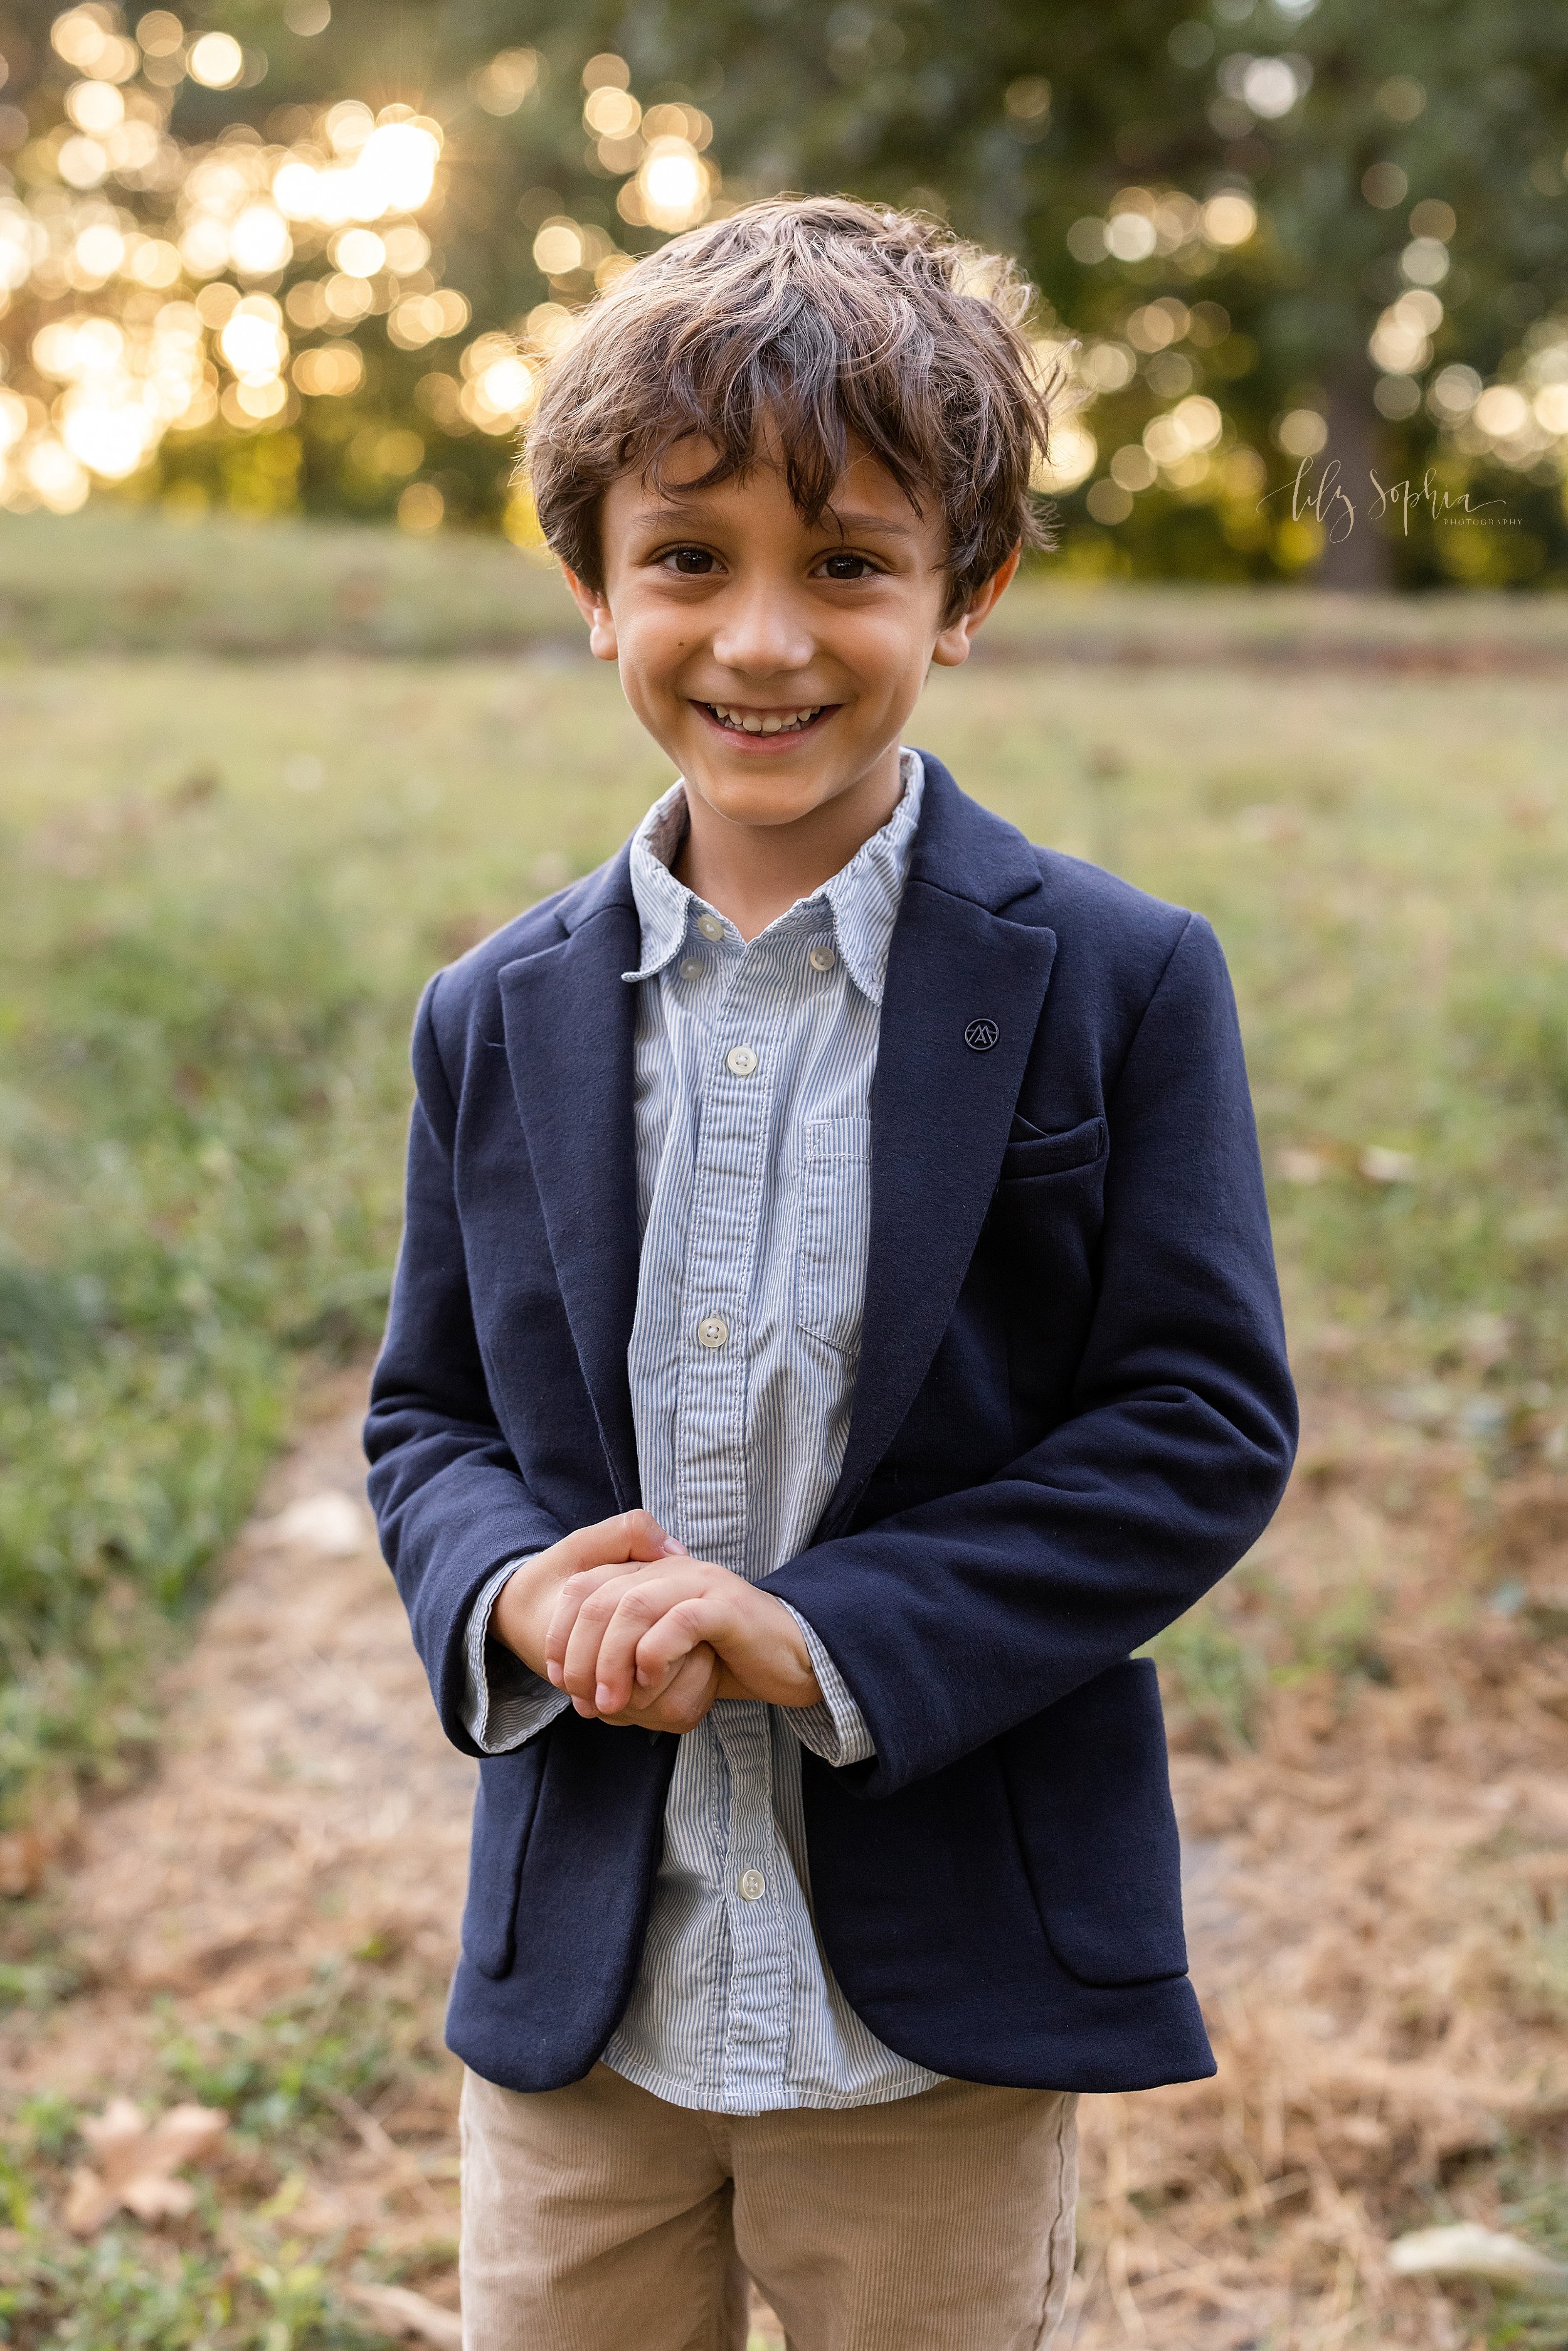  Family photo session with a young boy dressed in a sports jacket, a light blue shirt and khaki pants as he stands along a path in an Atlanta park at sunset. 